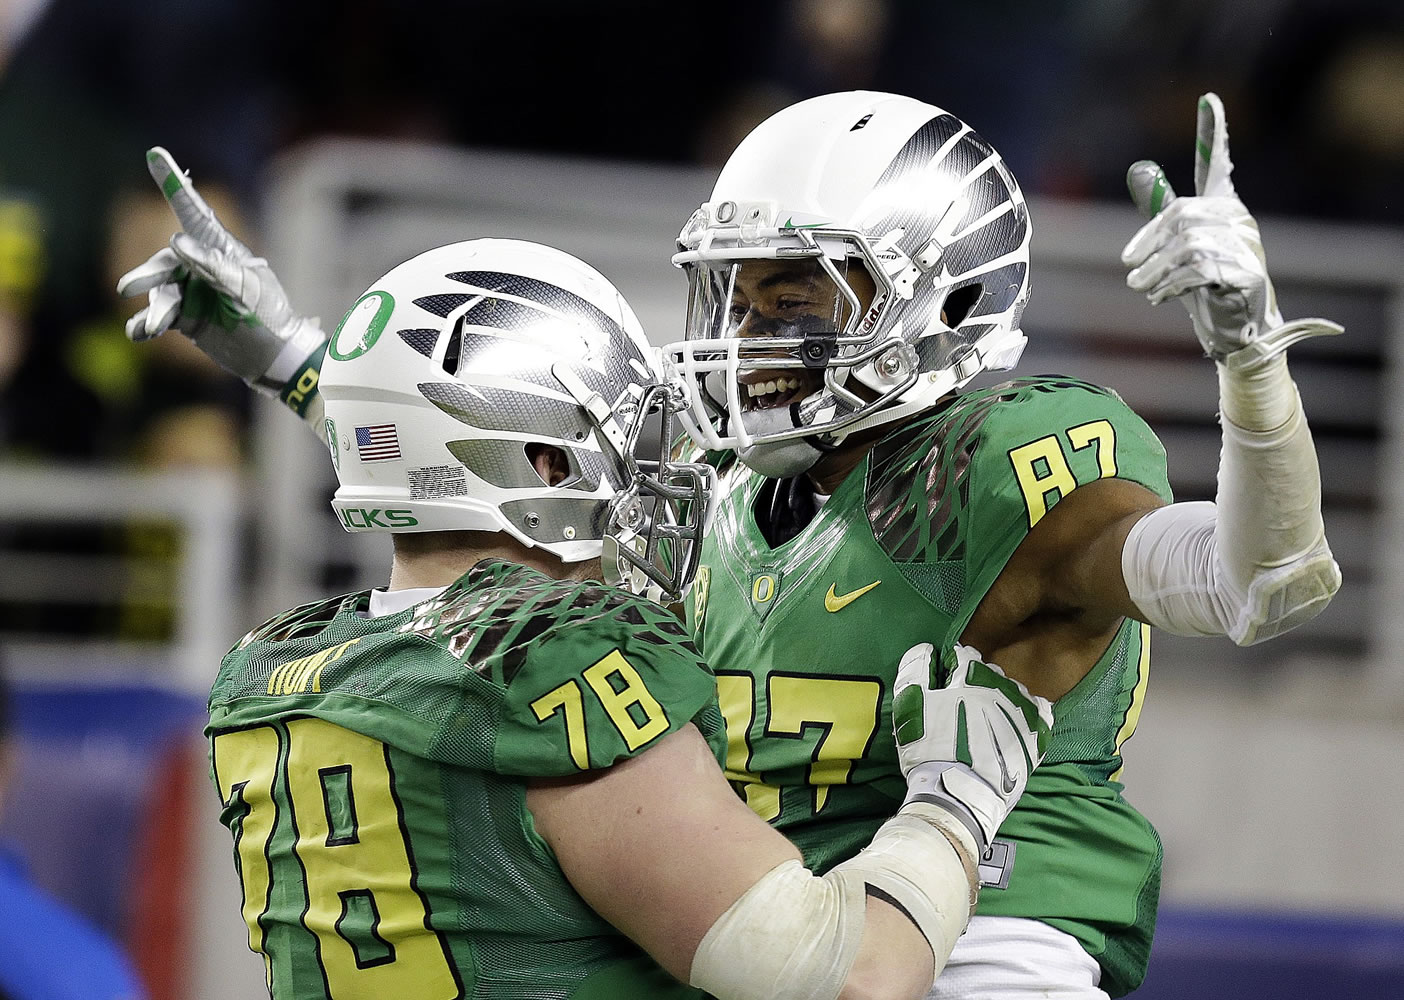 Oregon's Cameron Hunt, left, celebrates a touchdown made by Darren Carrington (87) during the second half of the Pac-12 Championship against Arizona on Friday, Dec. 5, 2014, in Santa Clara, Calif. Oregon won the game, 51-13.